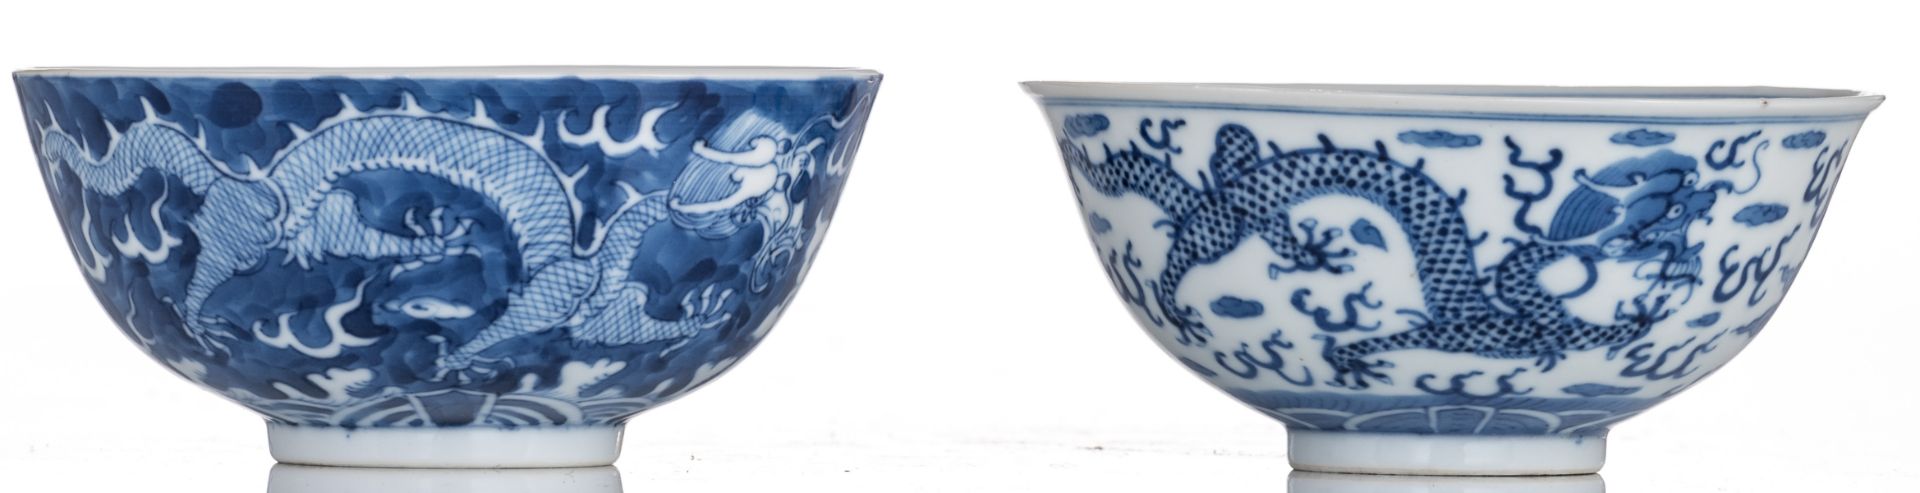 Two Chinese blue and white dragon decorated bowls, with a Kangxi mark, H 5,5 - 6 - ø 12,5 - 13 cm - Bild 5 aus 7